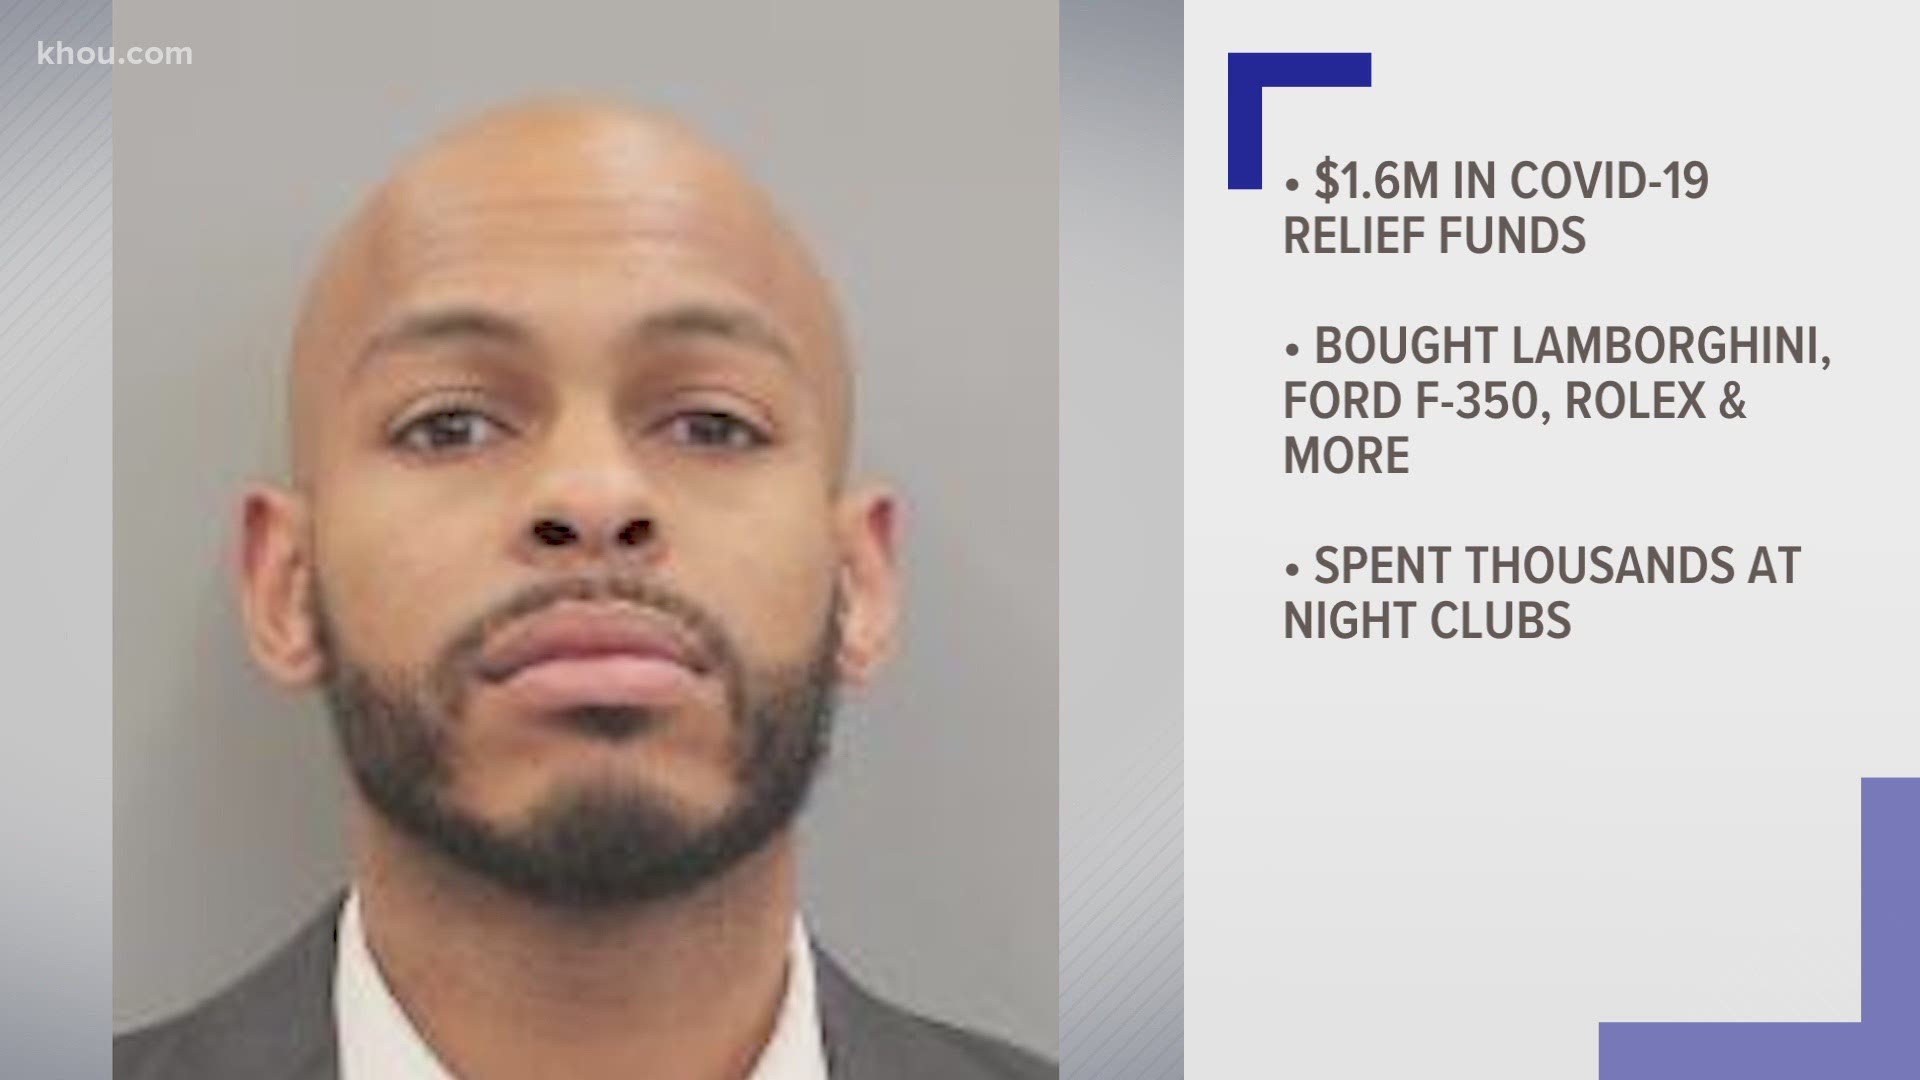 Lee Price III is also accused of using the CARES Act funds on real estate, a Rolex and expensive vehicles.